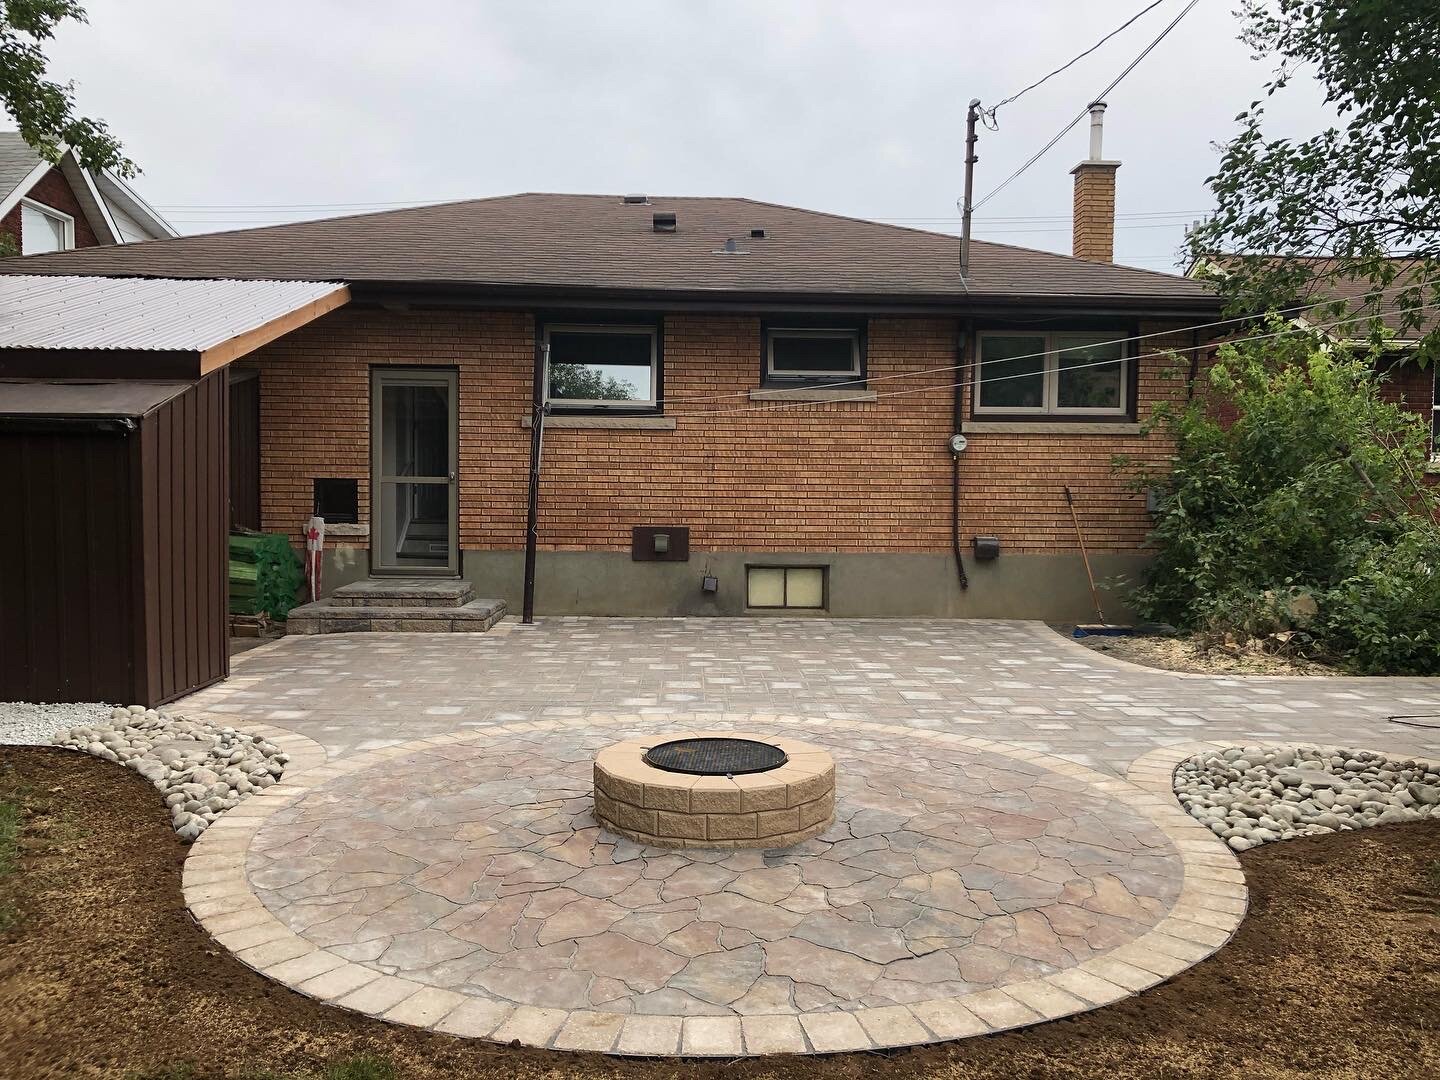 Flagstone Circle Patio Fire pit area, with a Verano paver patio furniture area, tied in with a roman paver border throughout, river rock planter beds and a stone step 